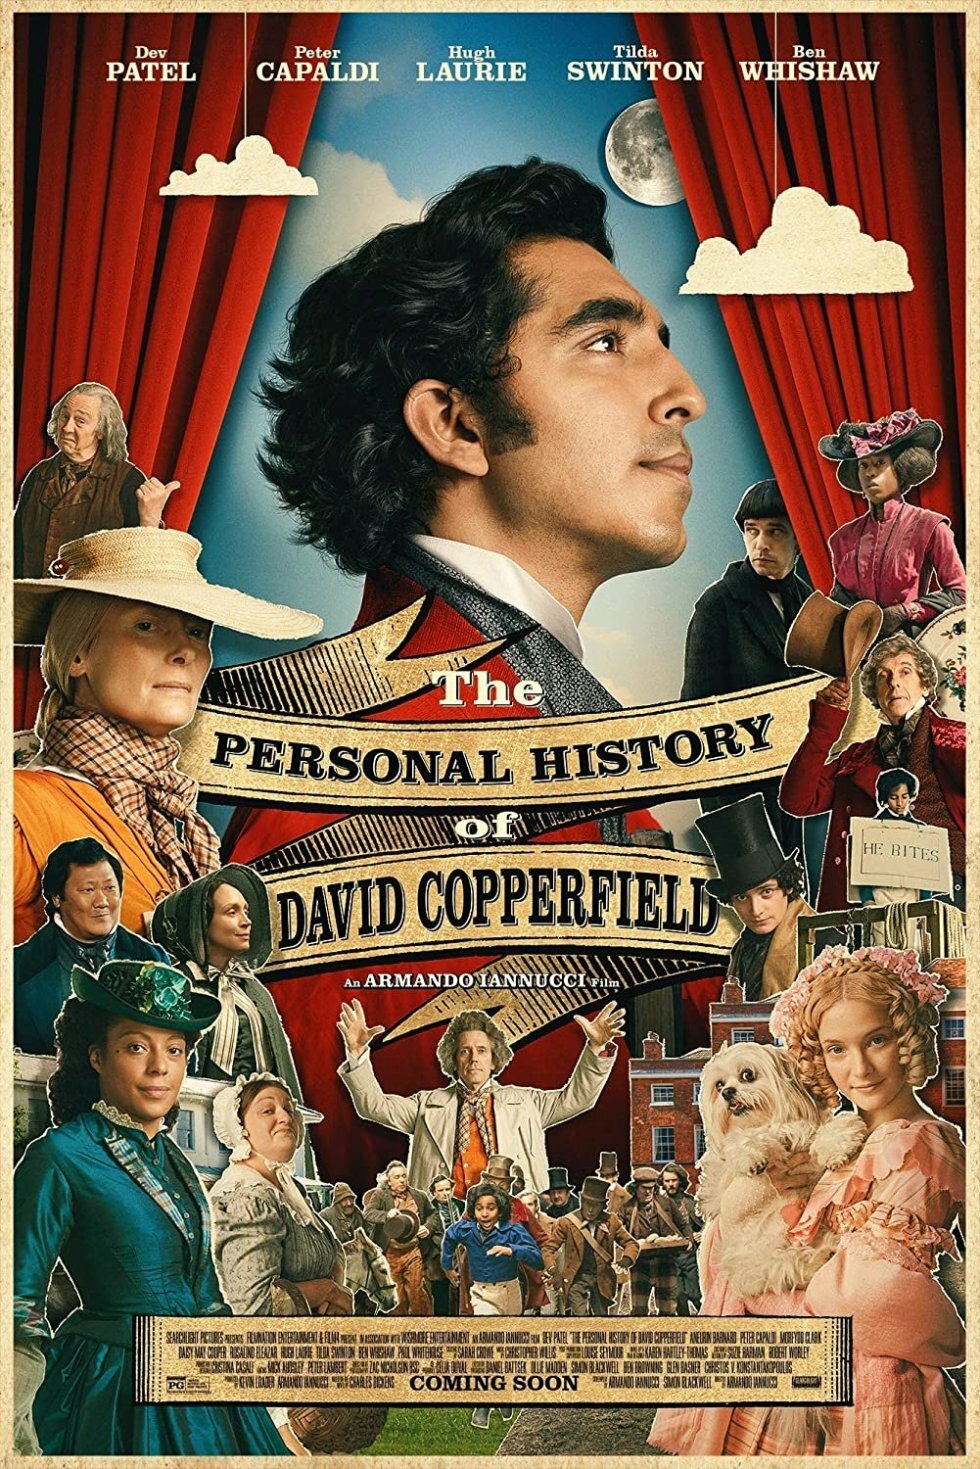 Anmeldelse: The Personal History of David Copperfield